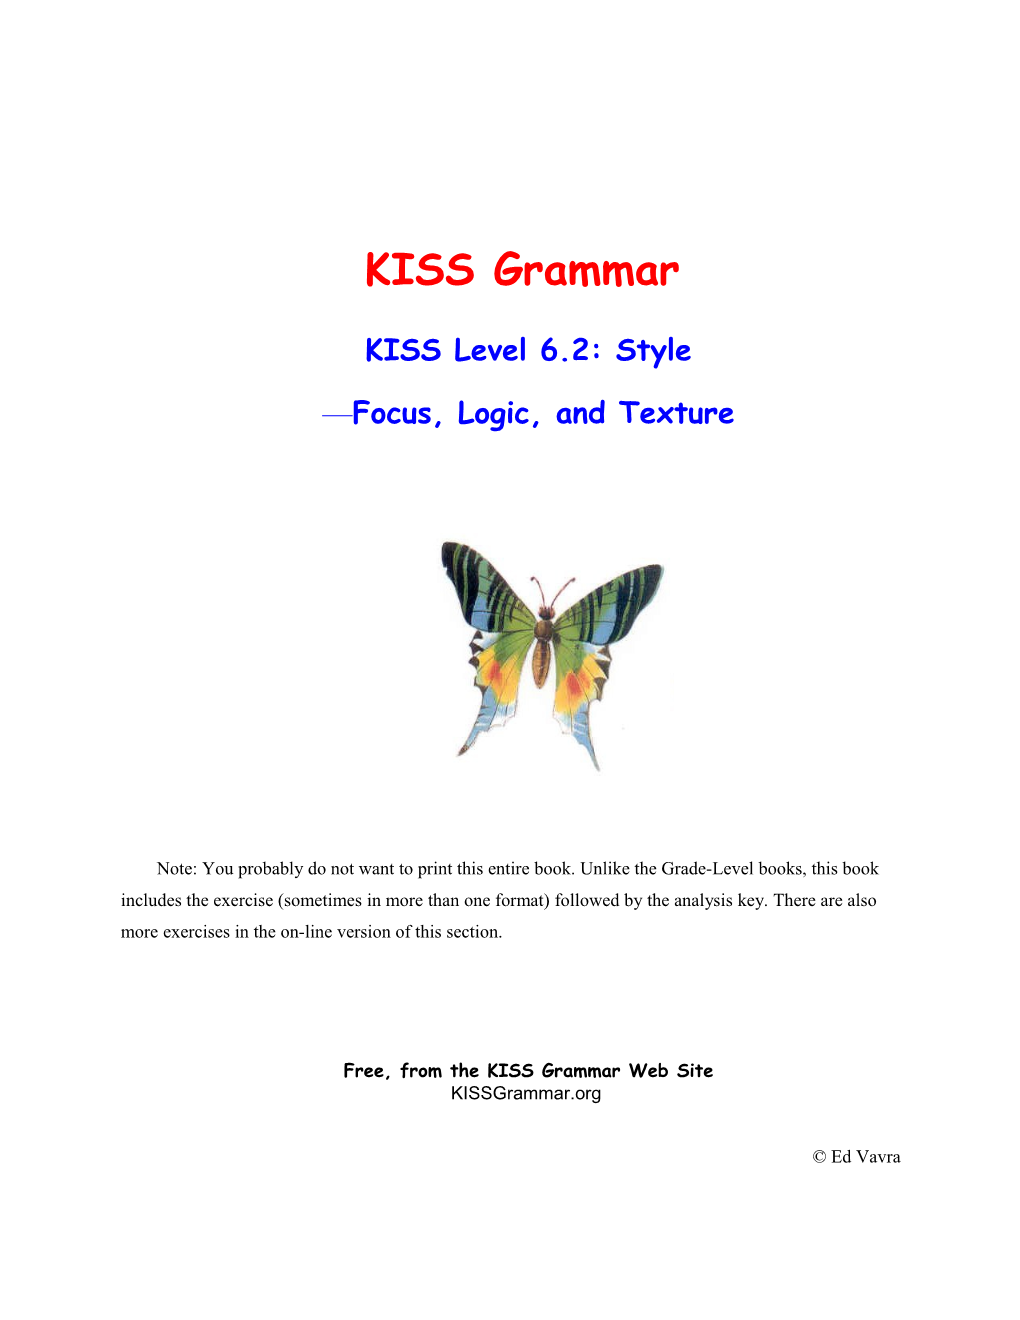 KISS Level 6.2: Style